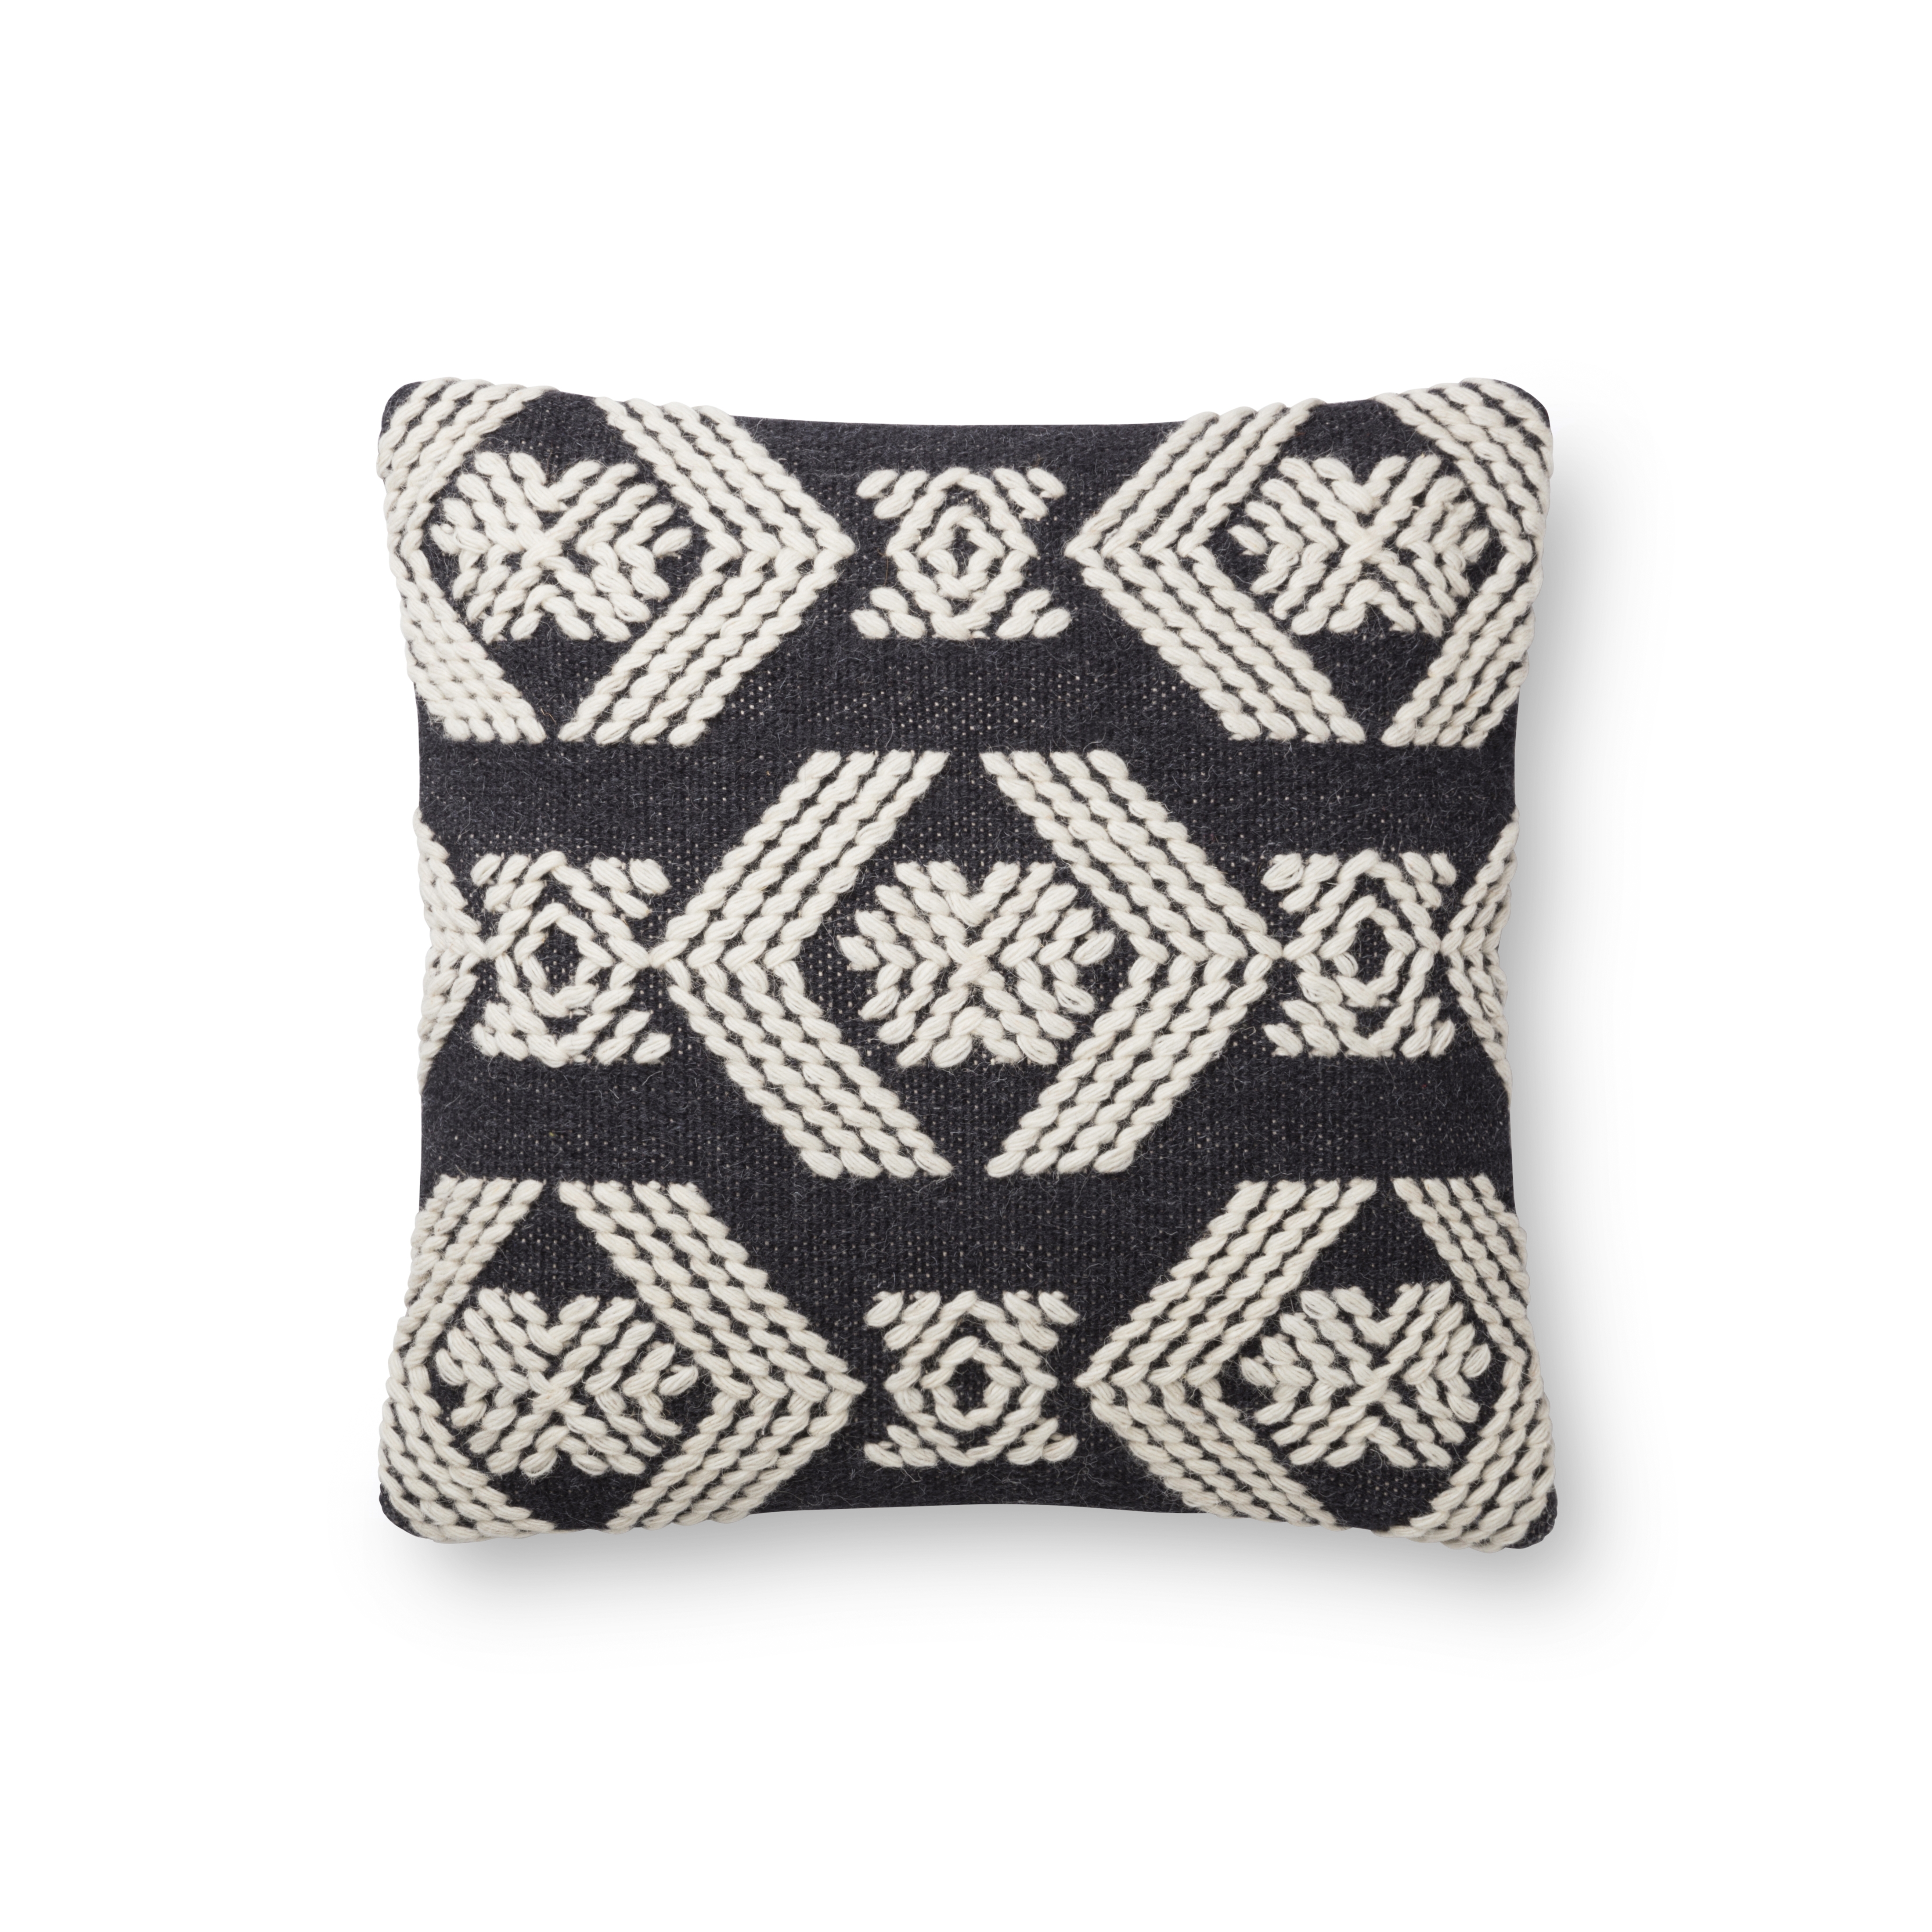 Magnolia Home by Joanna Gaines PILLOWS P1105 INDIGO / IVORY 13" x 35" Cover Only - Image 0